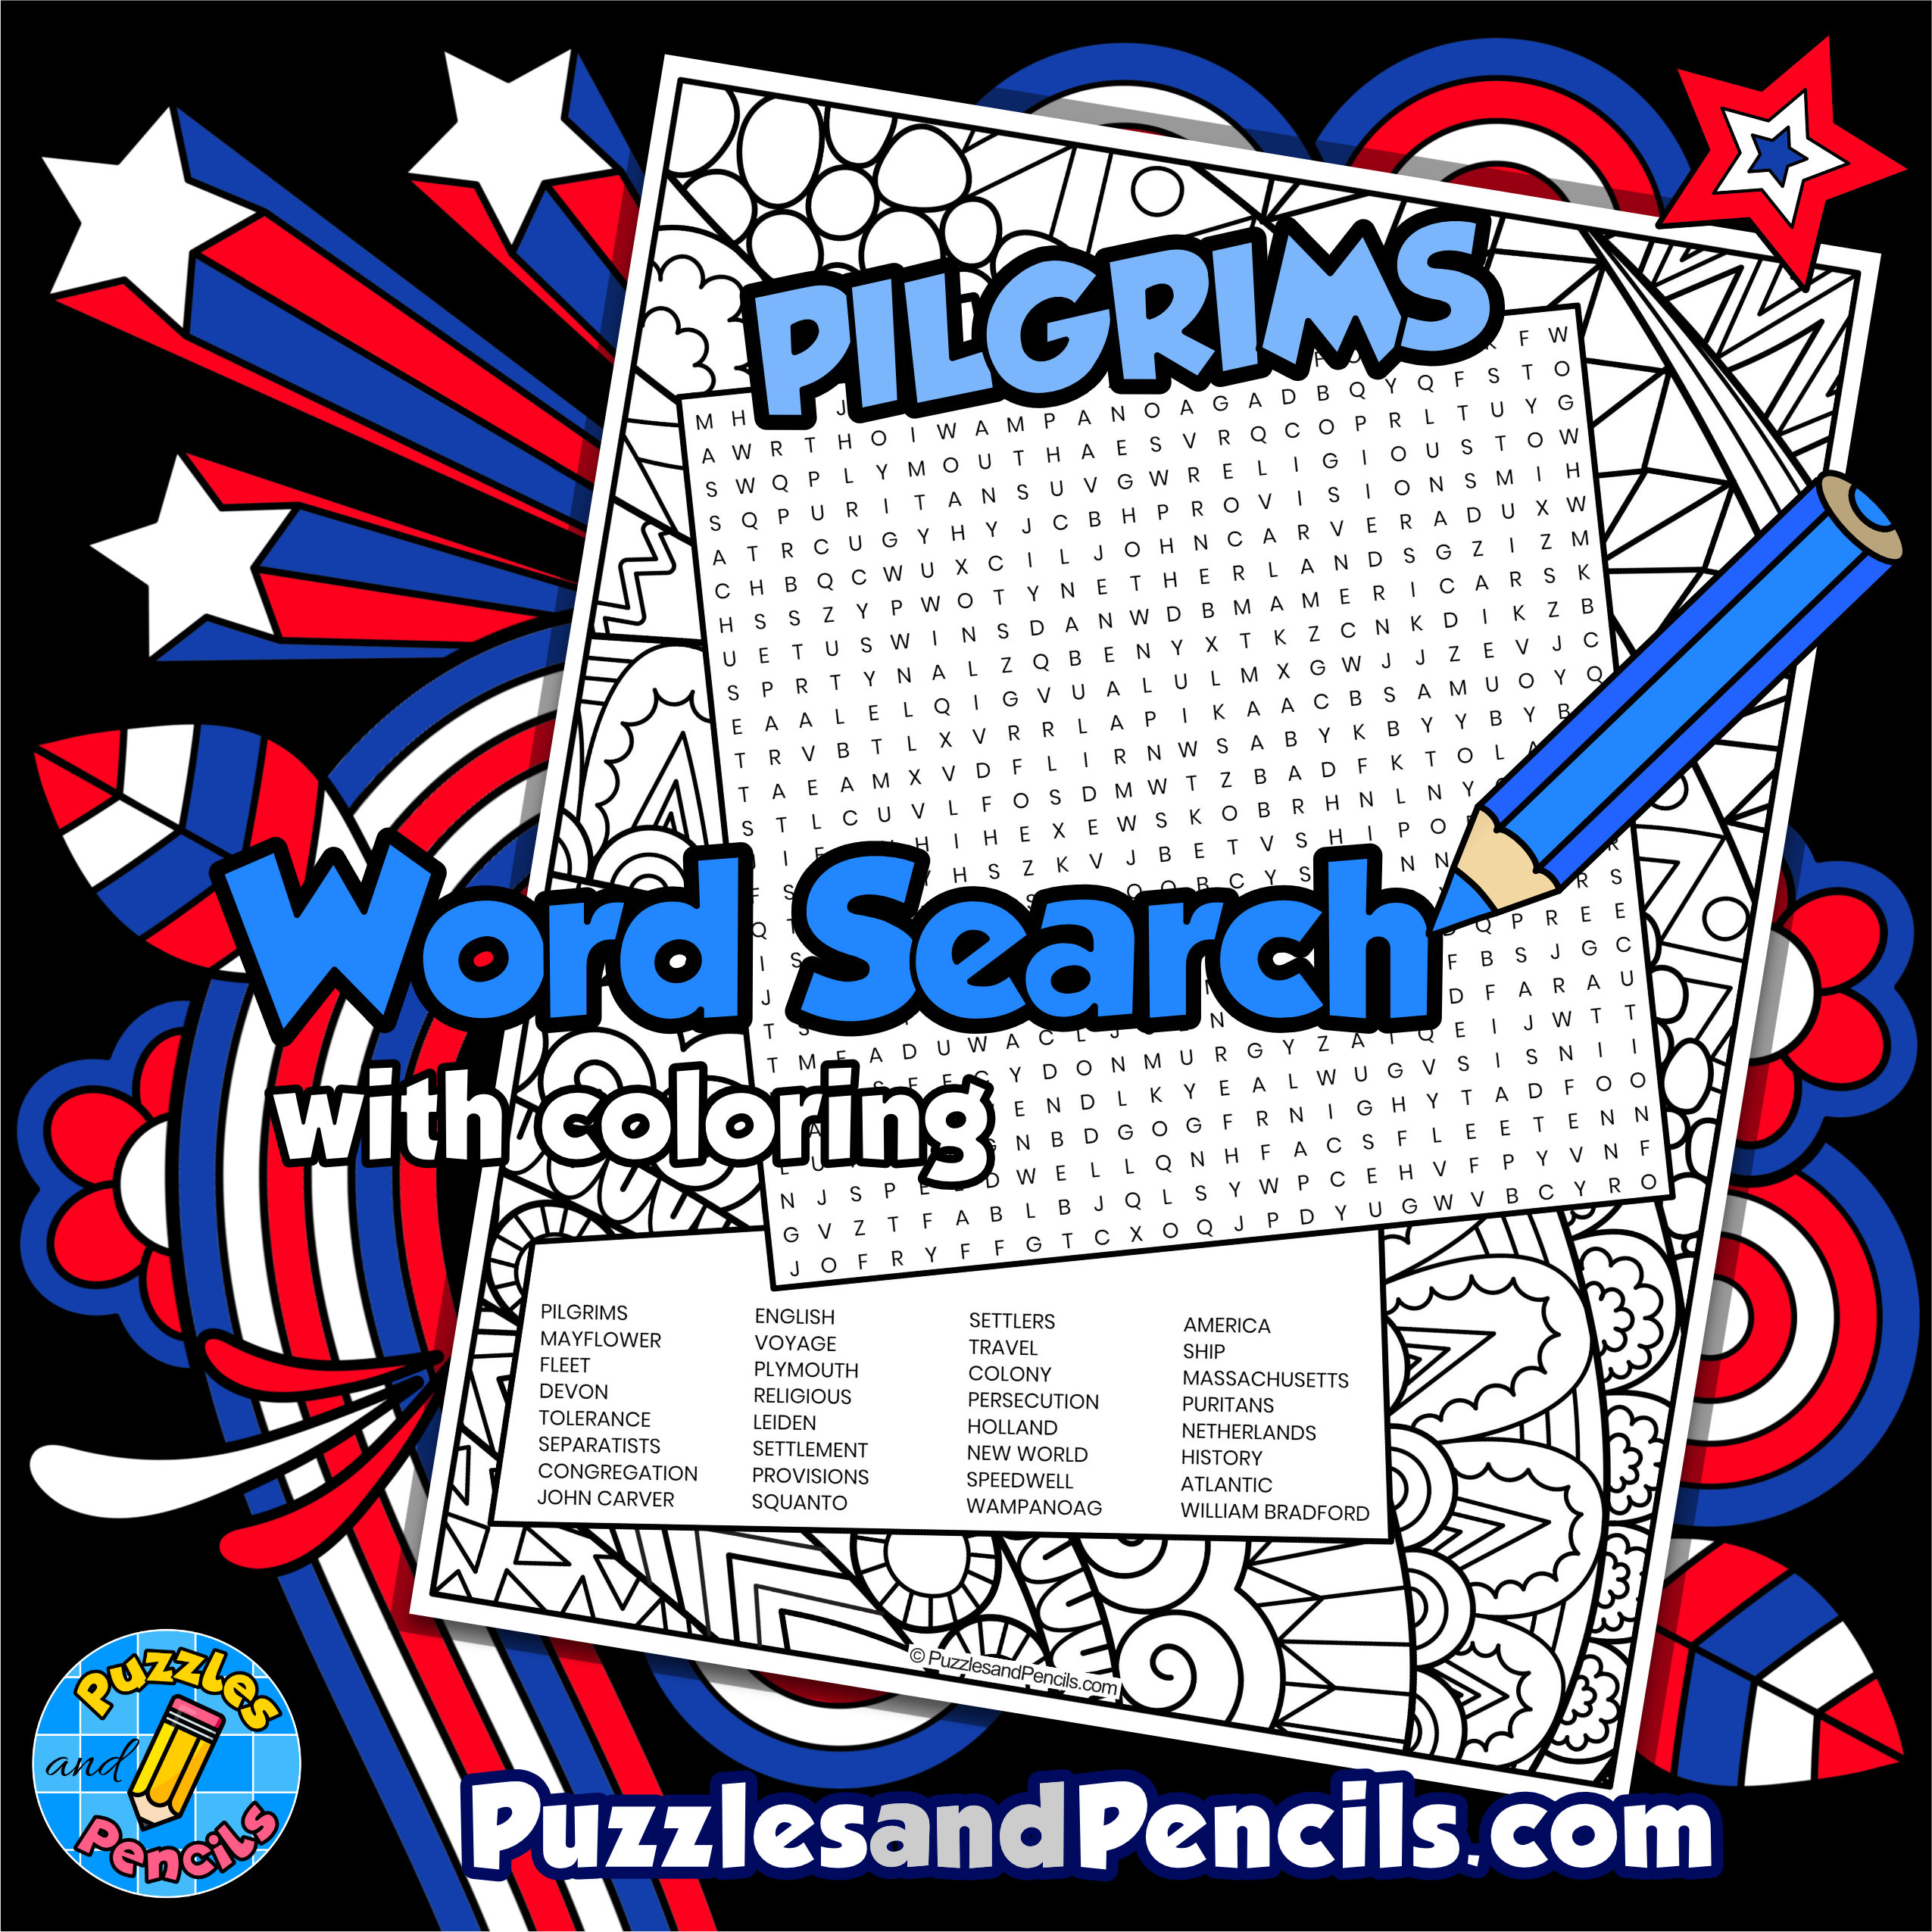 Pilgrims word search puzzle with coloring us history wordsearch made by teachers